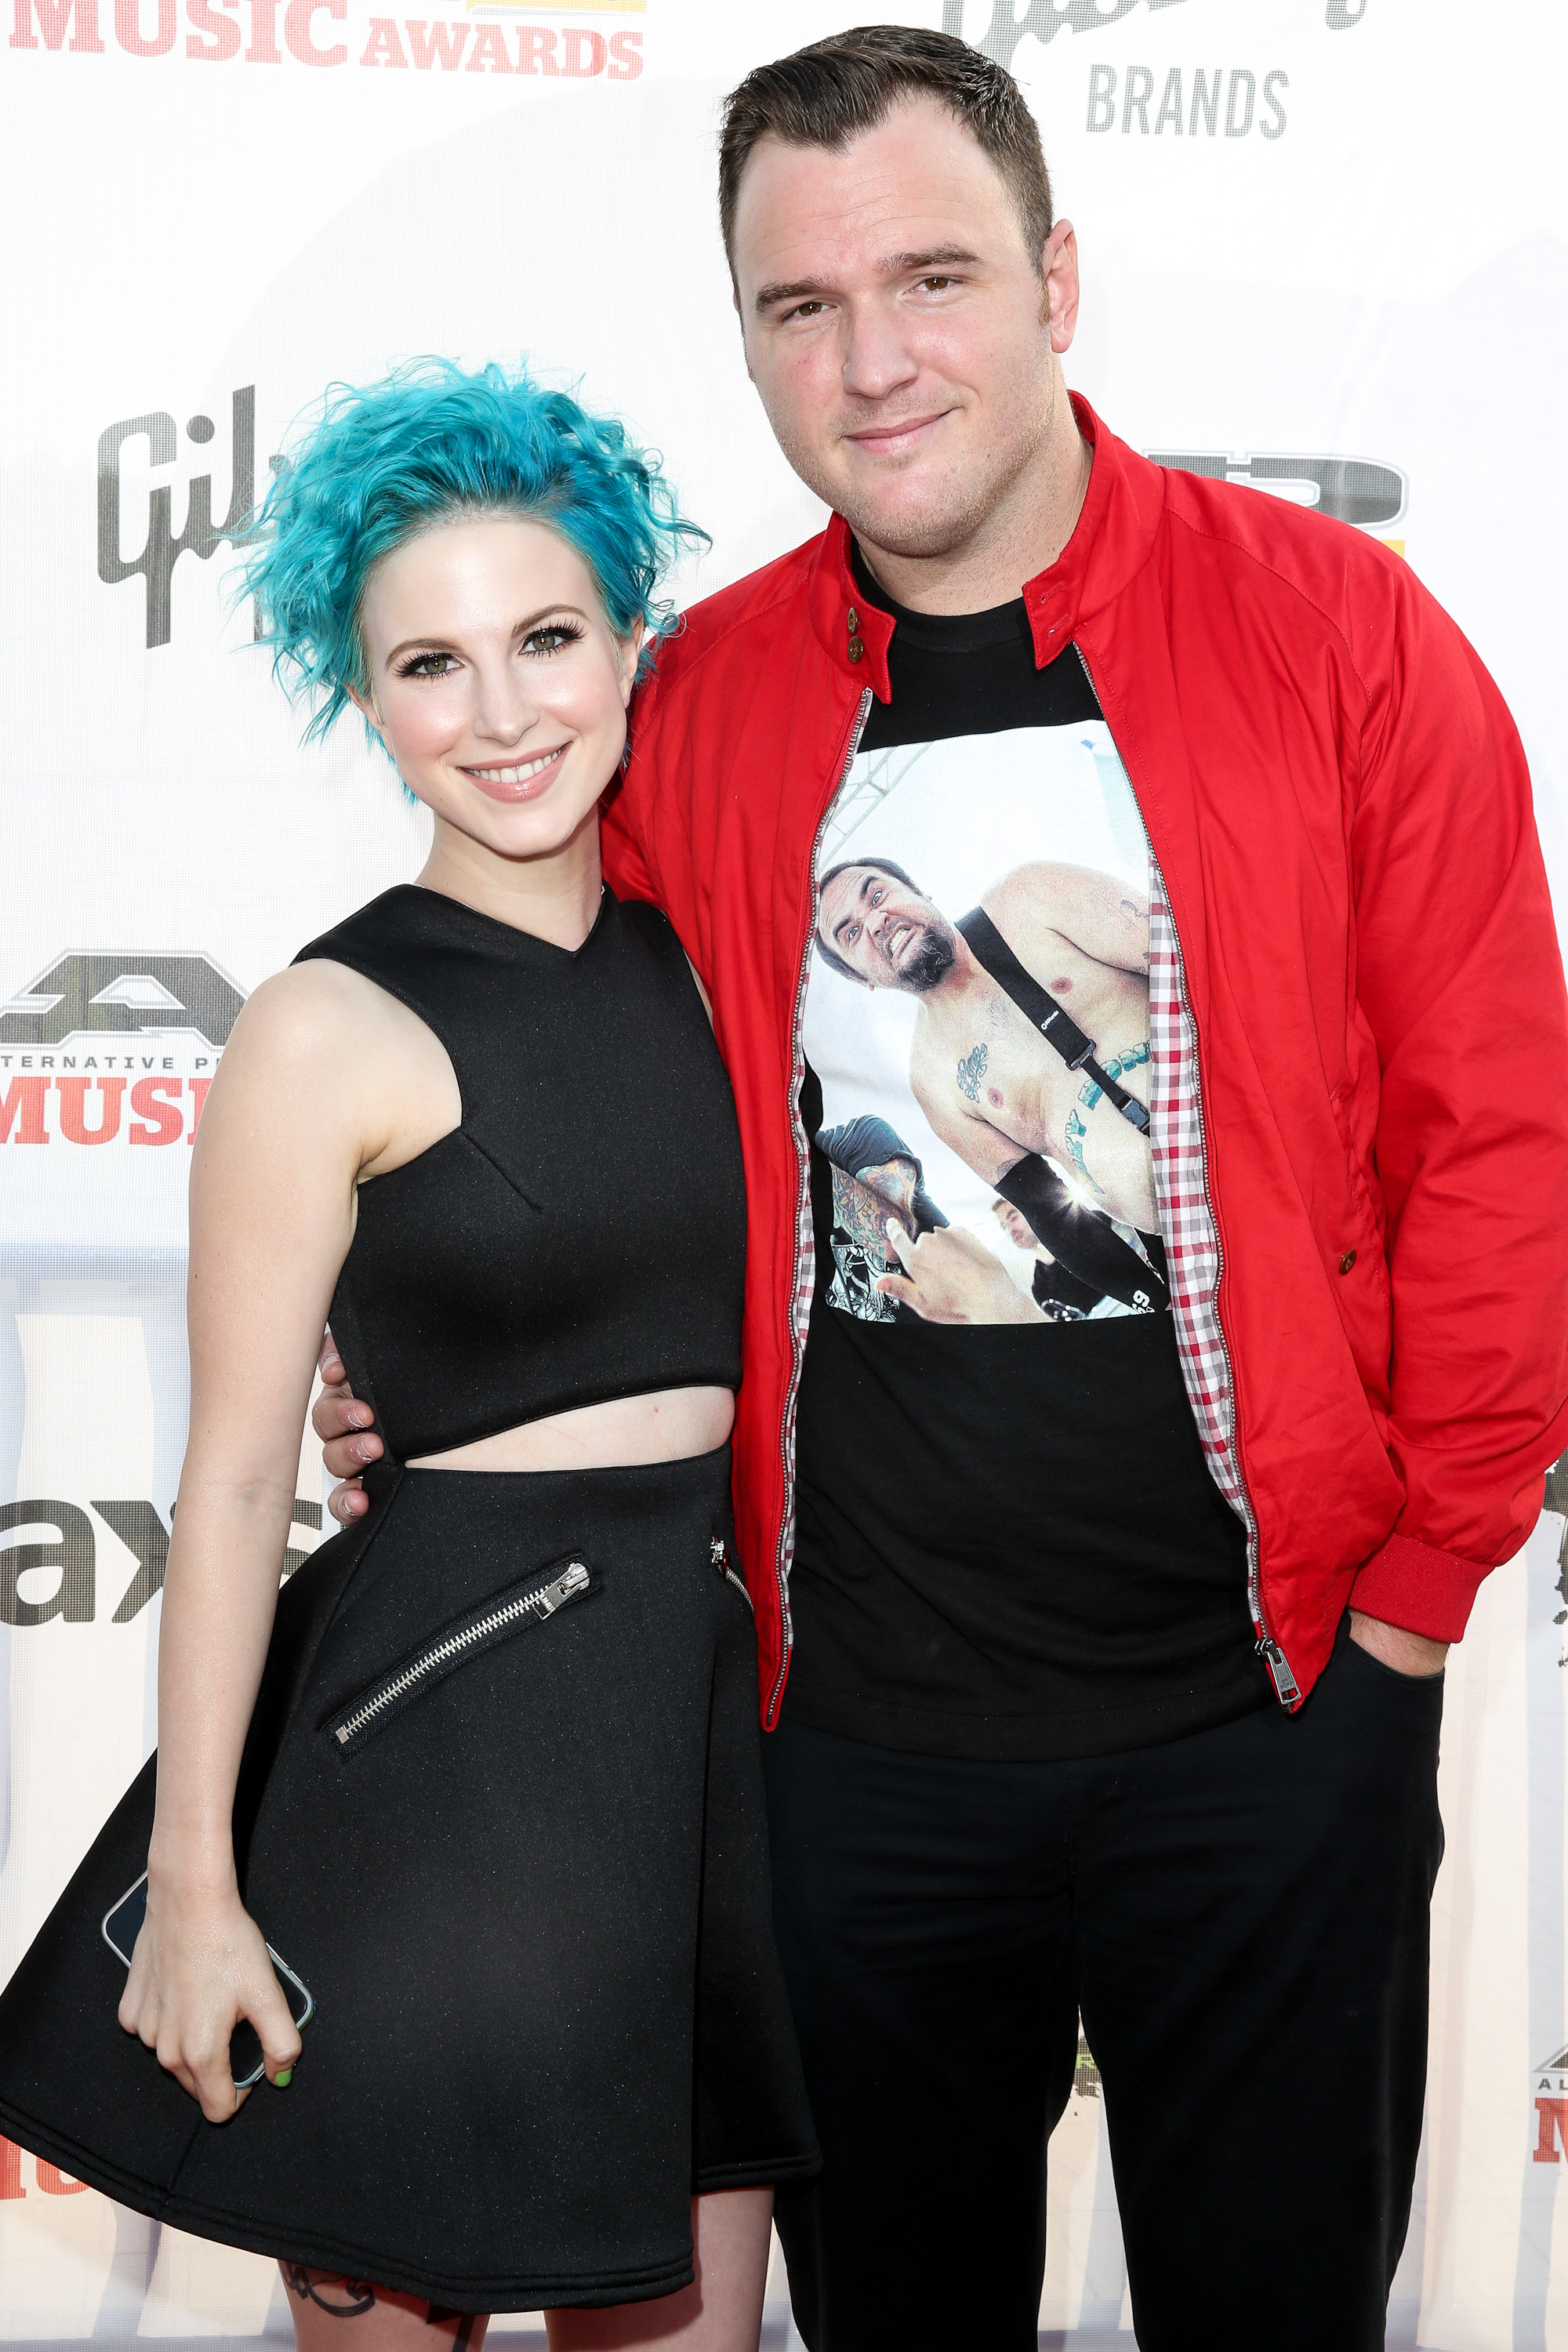 Hayley Williams Announces Divorce From Husband Chad Gilbert